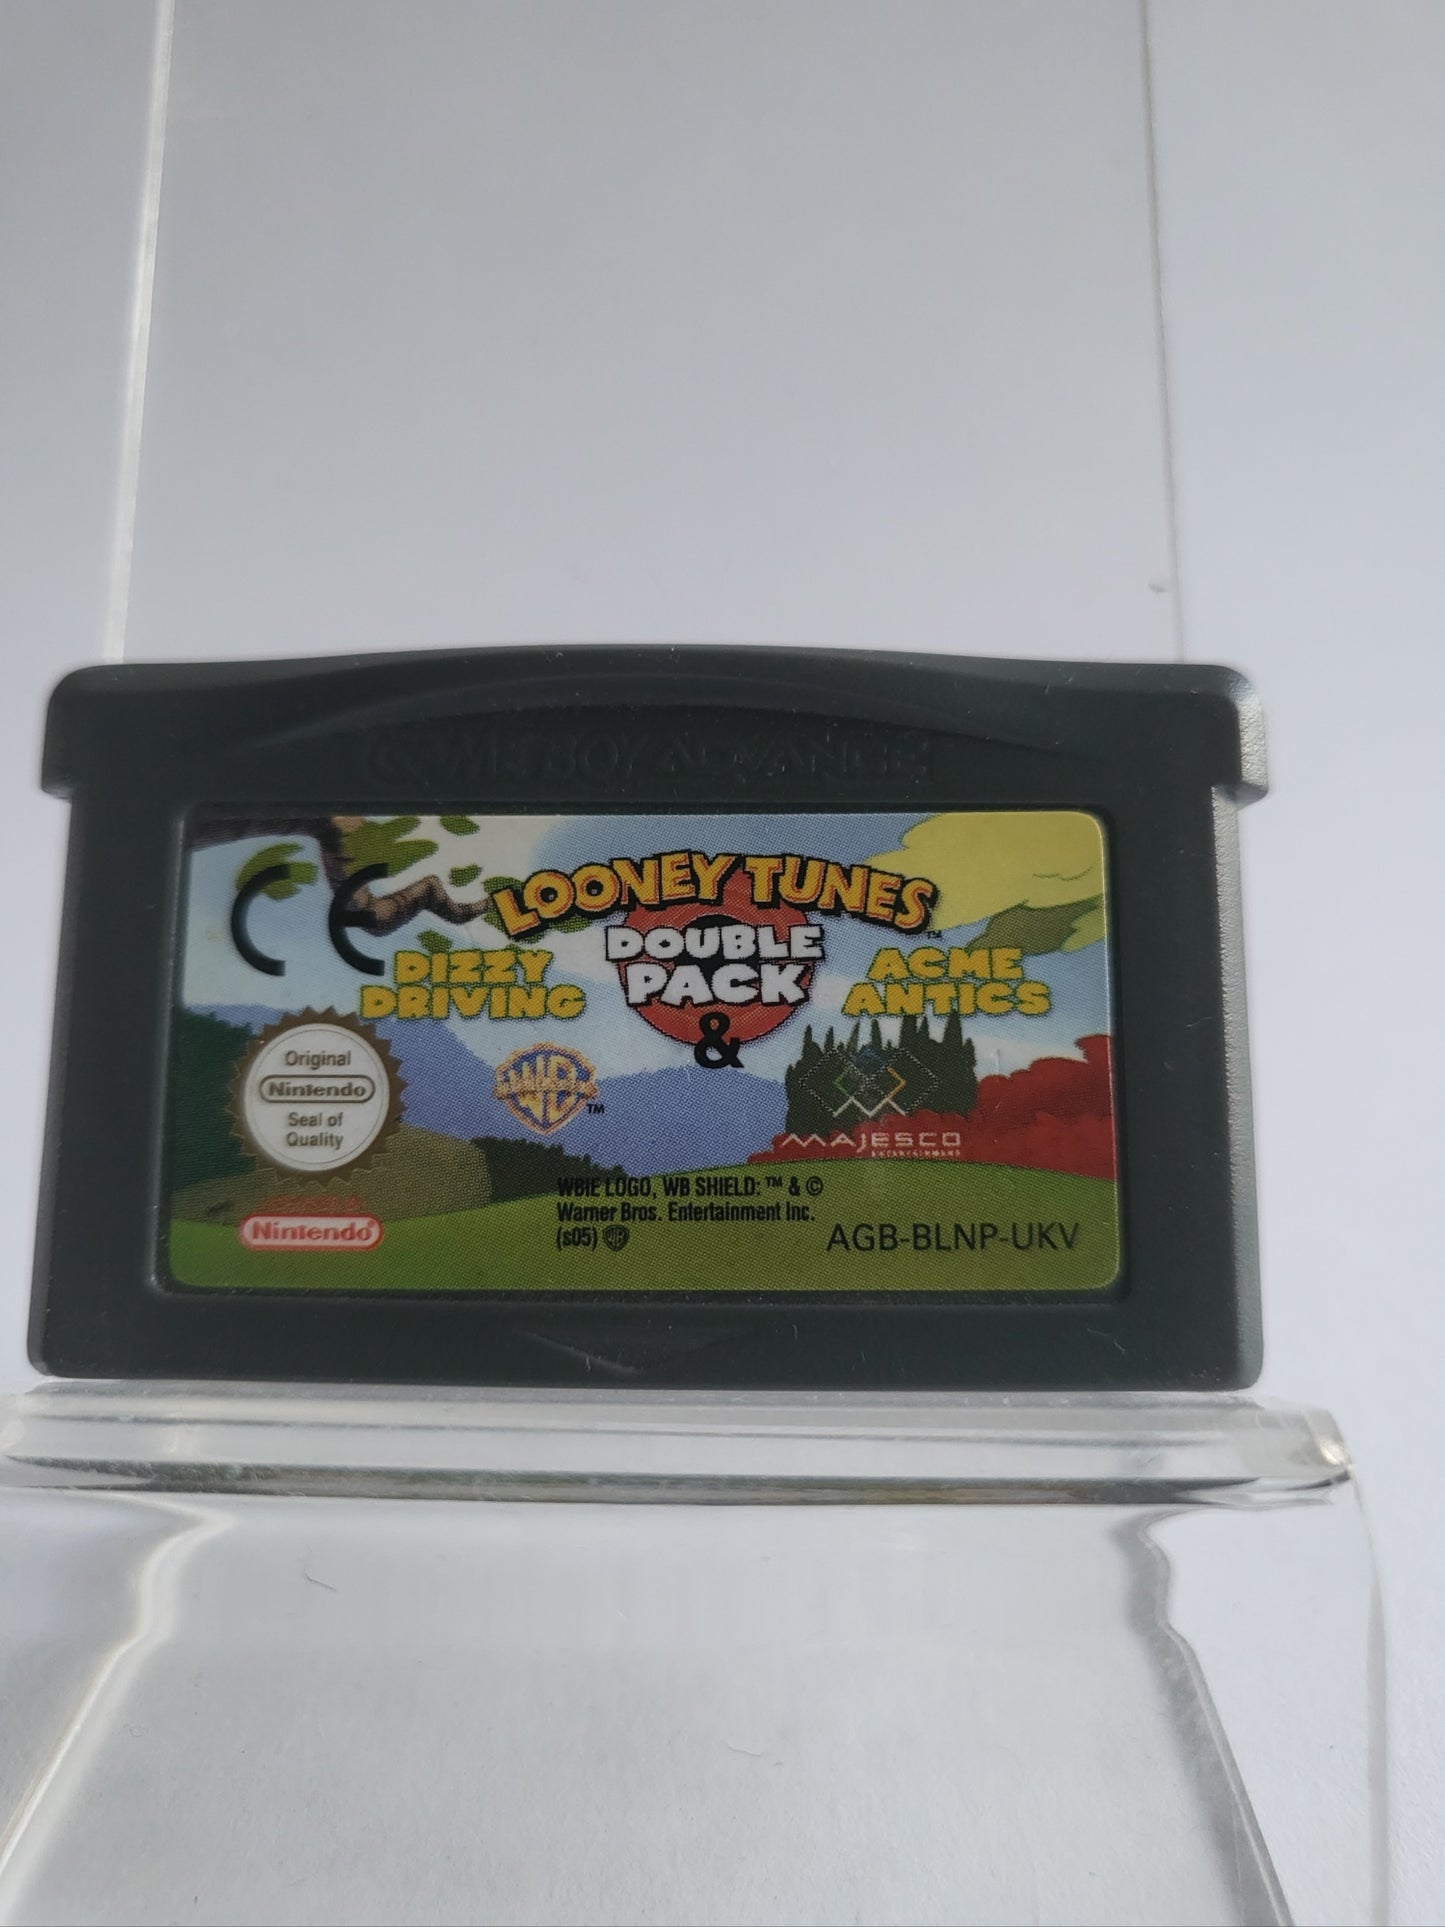 Looney Tunes Double Pack Game Boy Advance